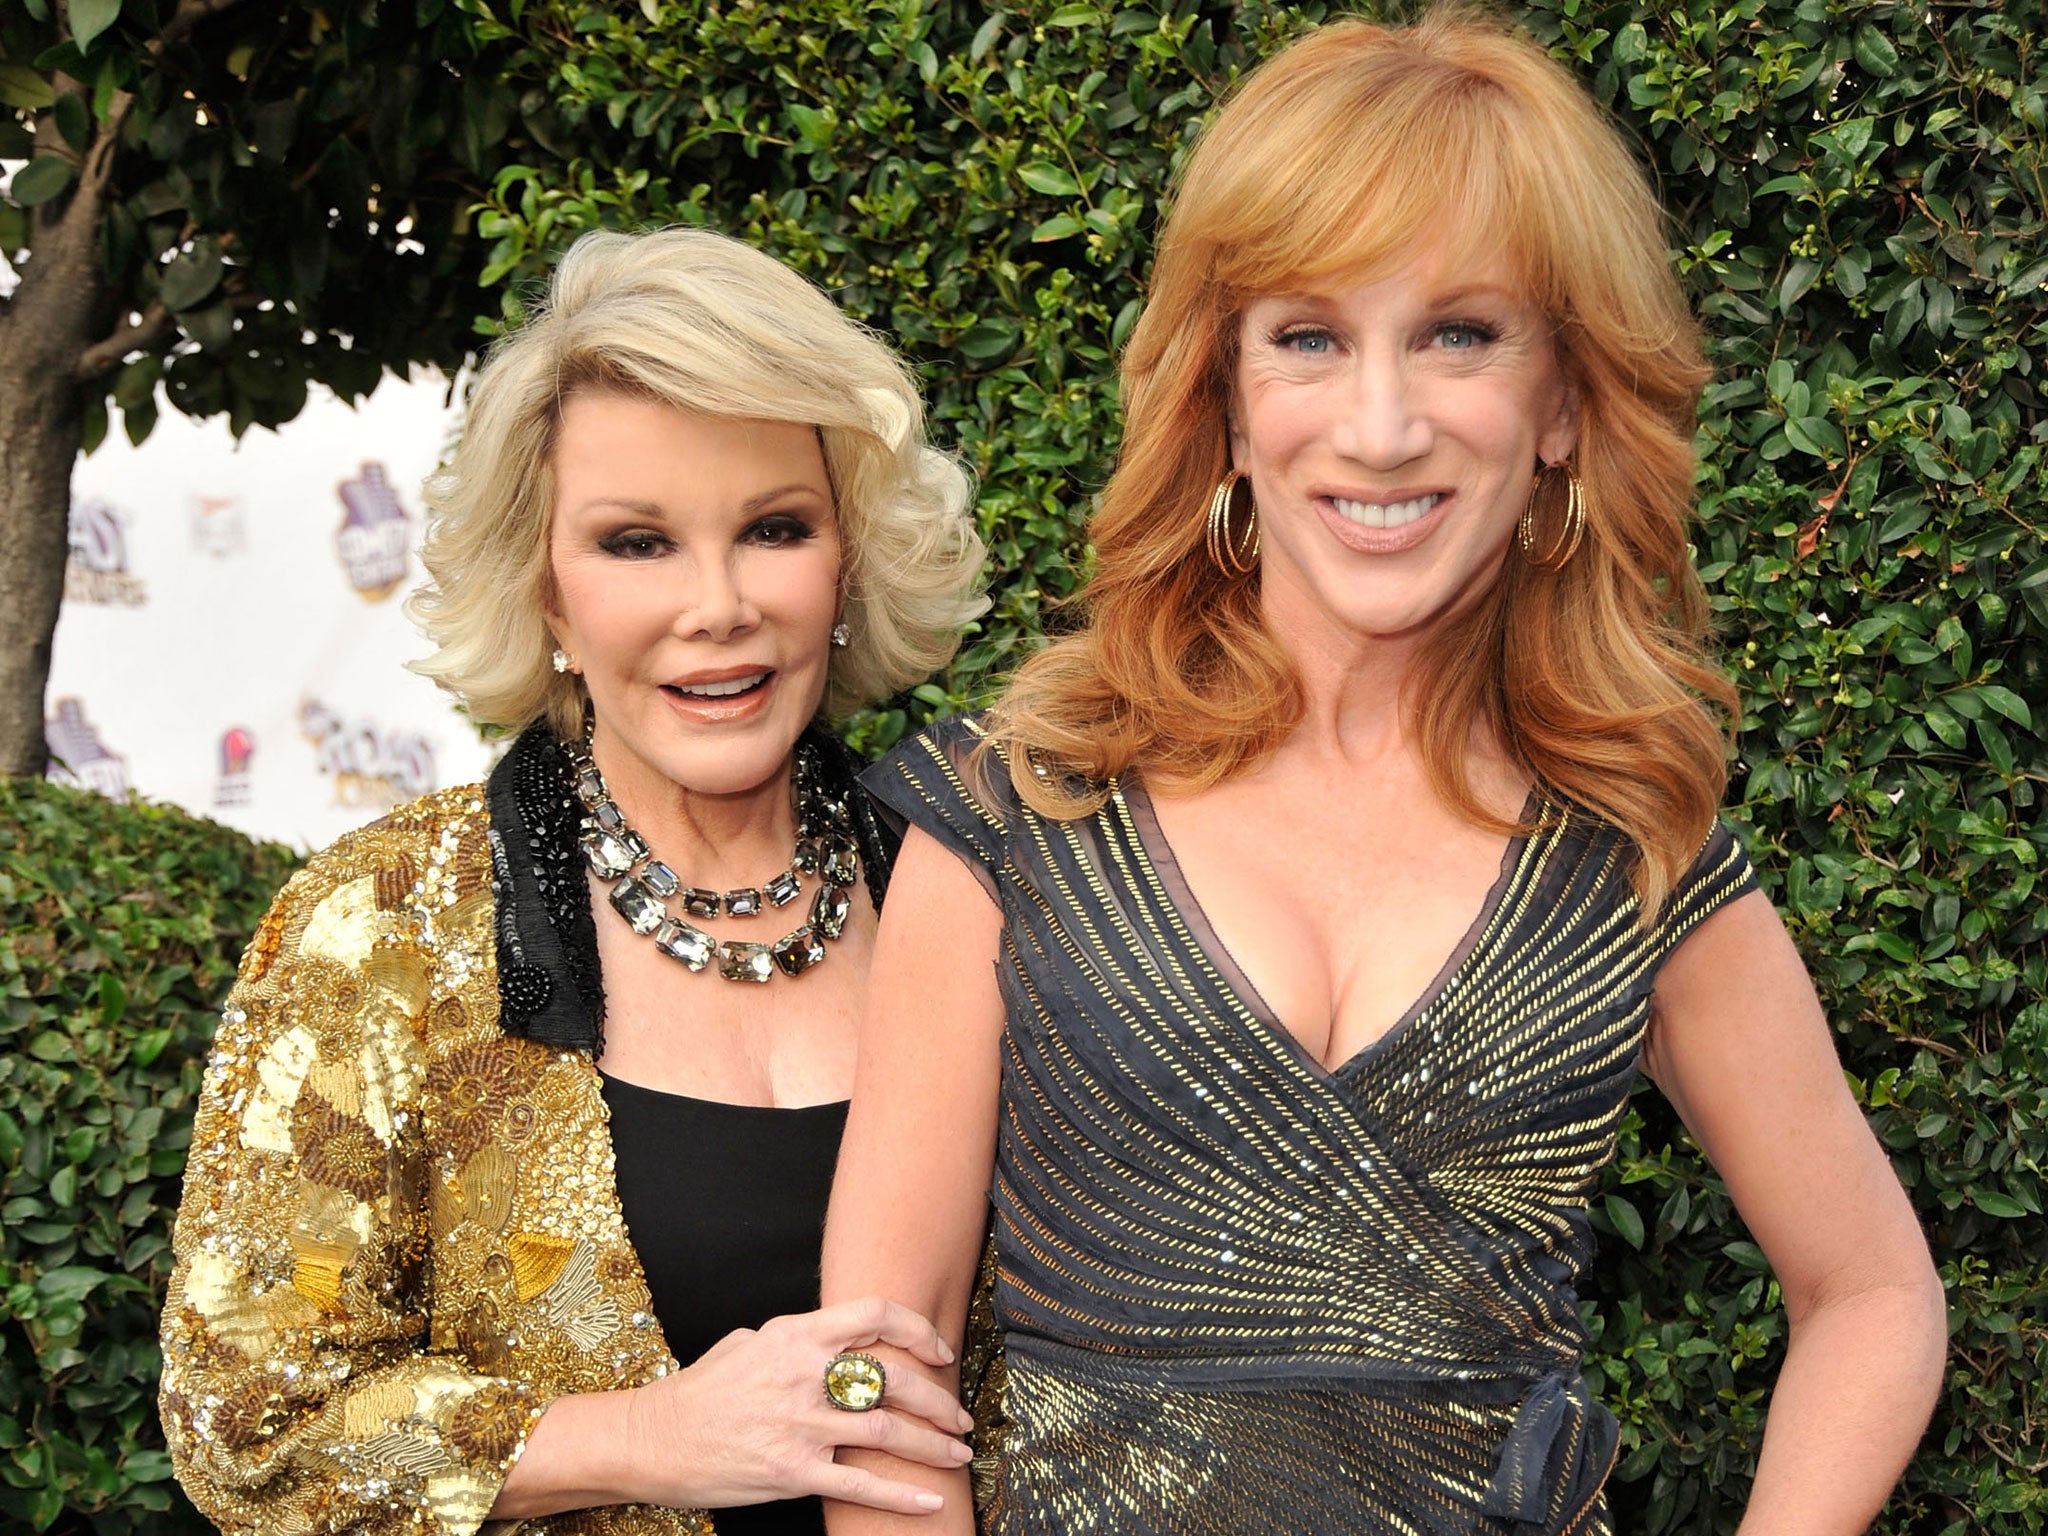 TV hosts Melissa and Joan Rivers with actress Kathy Griffin arrive to the 62nd Annual Golden Globe Awards at the Beverly Hilton Hotel January 16, 2005 in